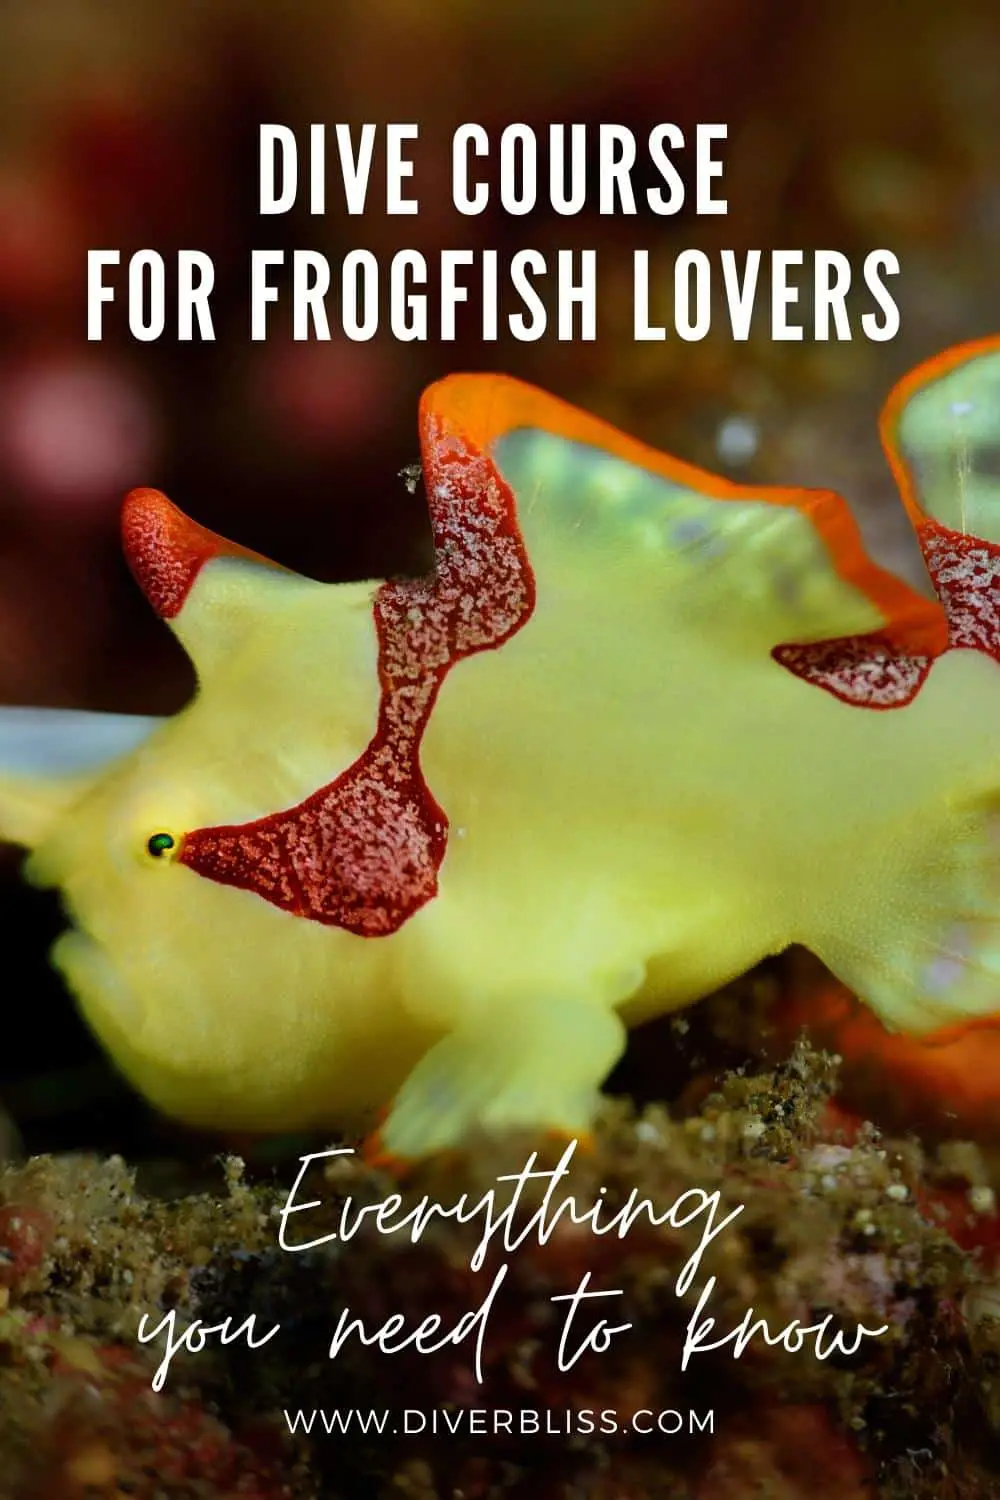 Dive course for frogfish lovers